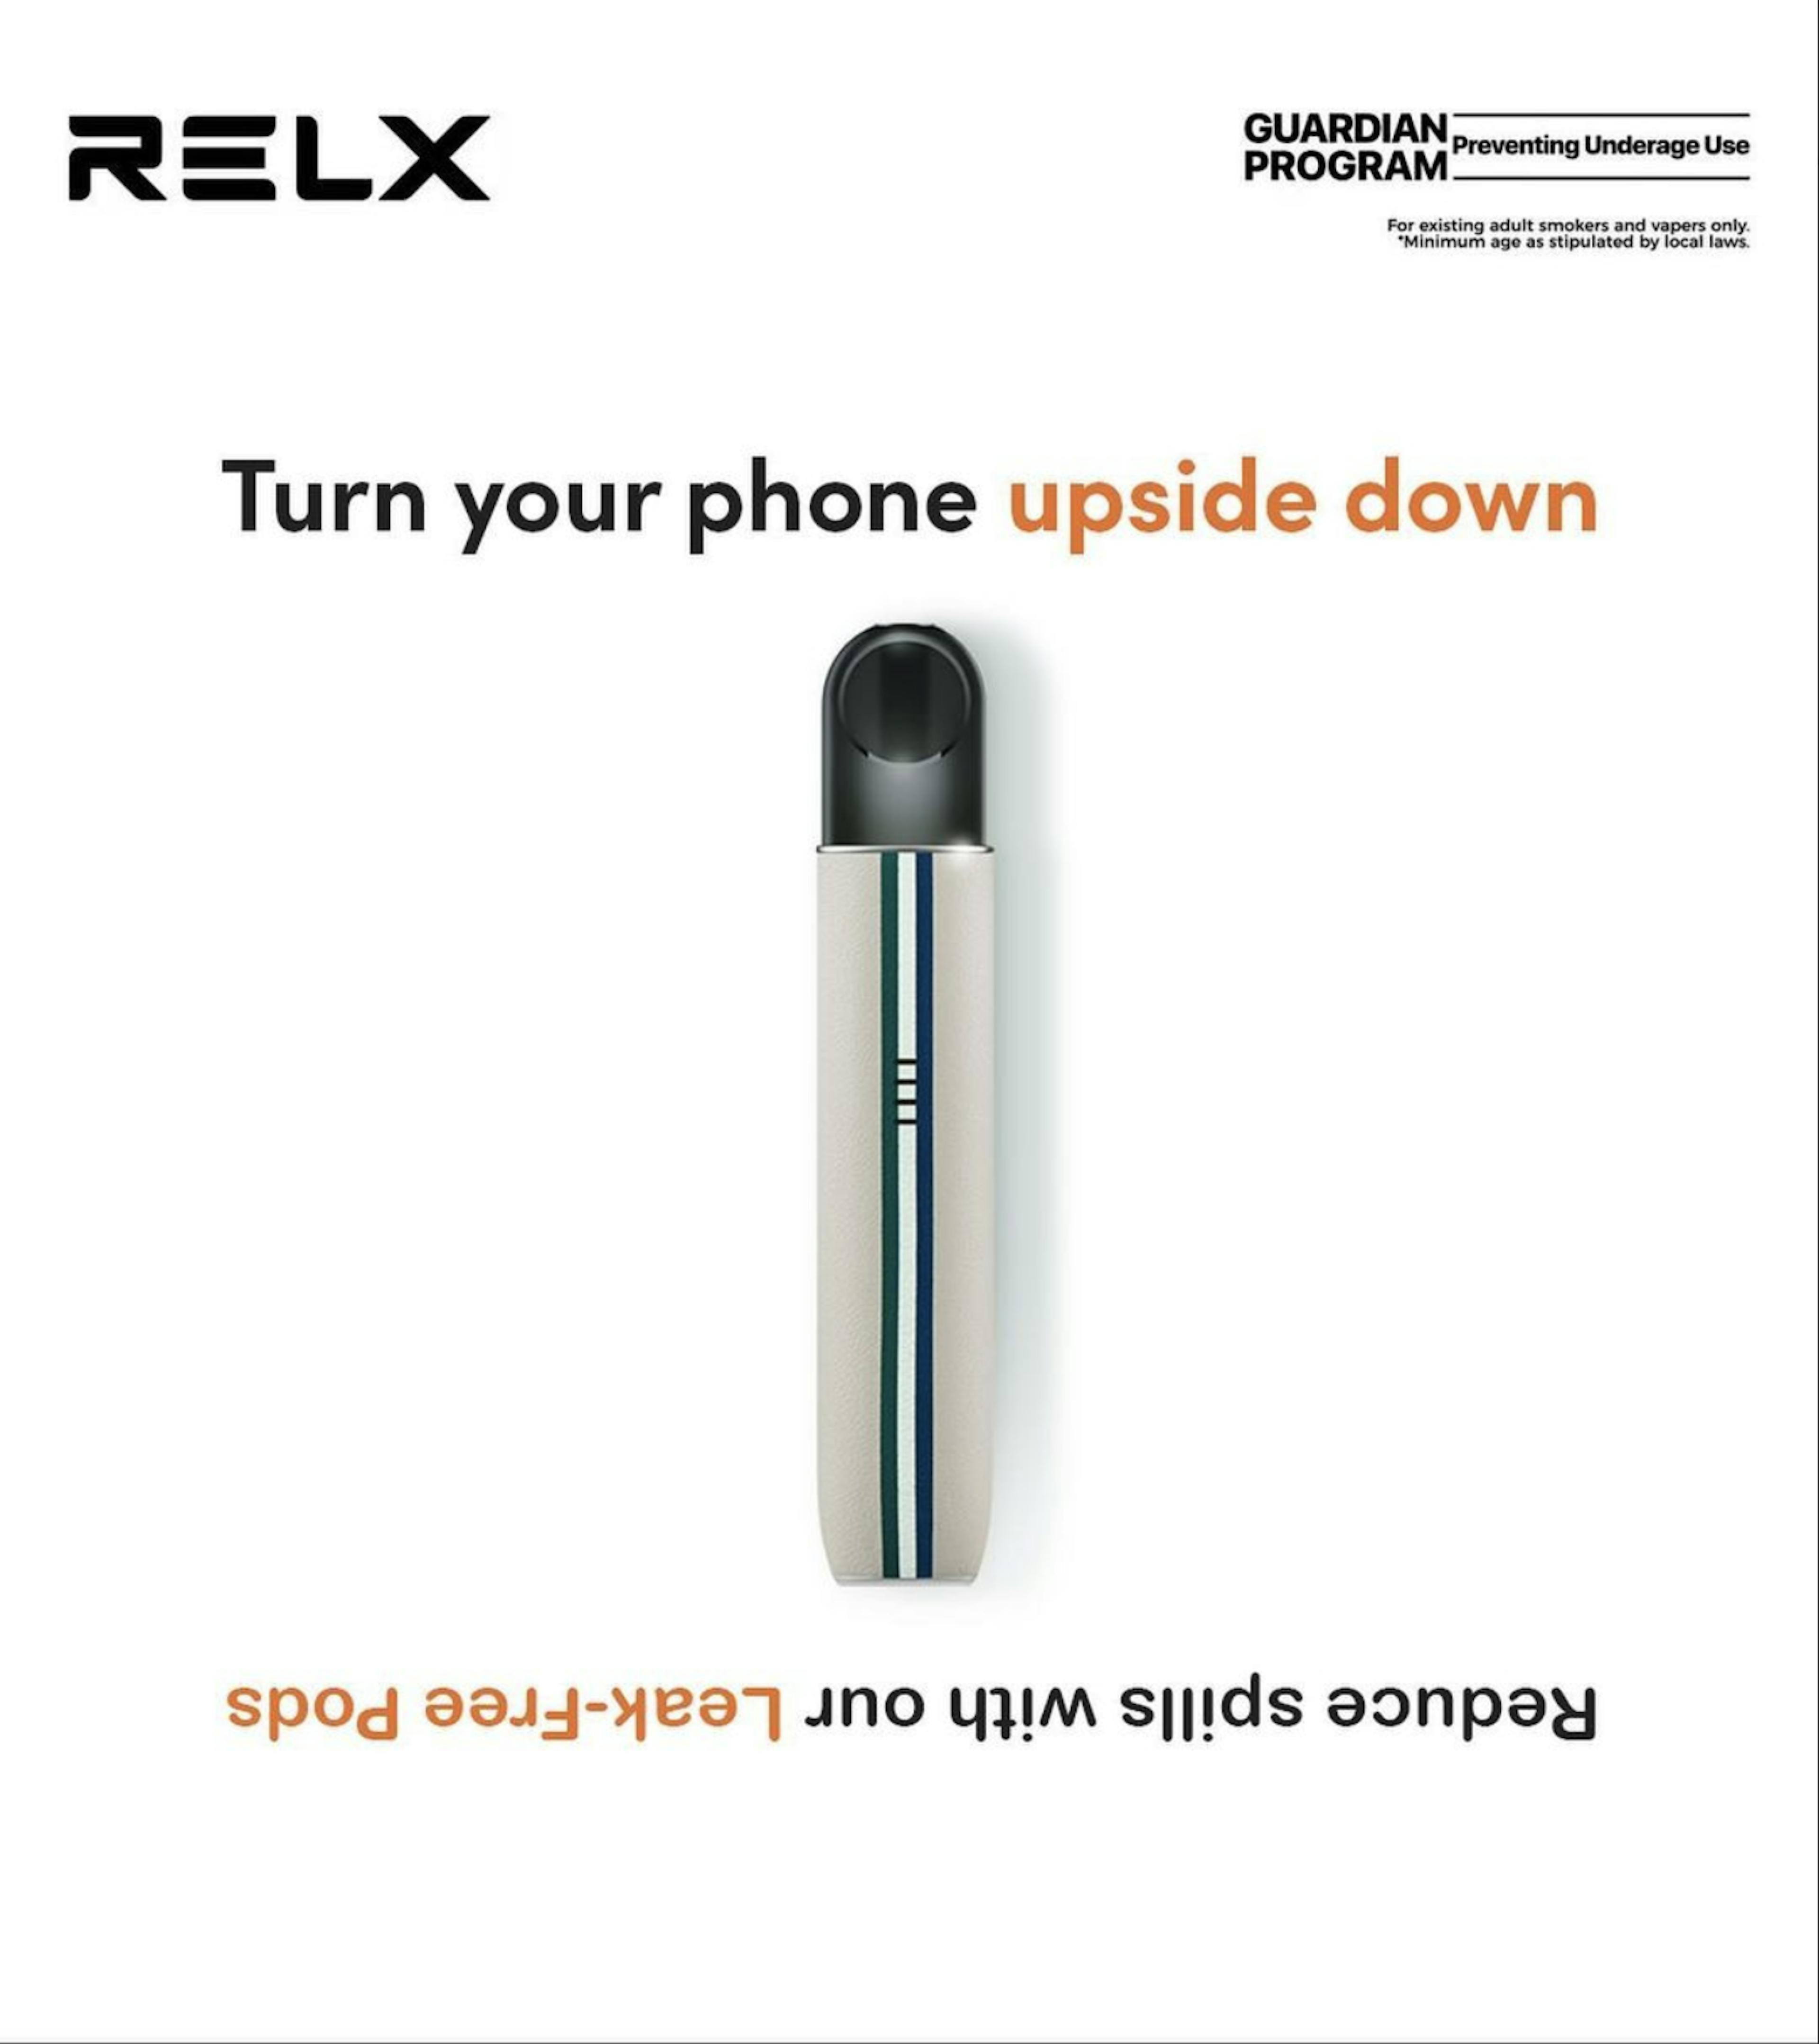 Ad for RELX